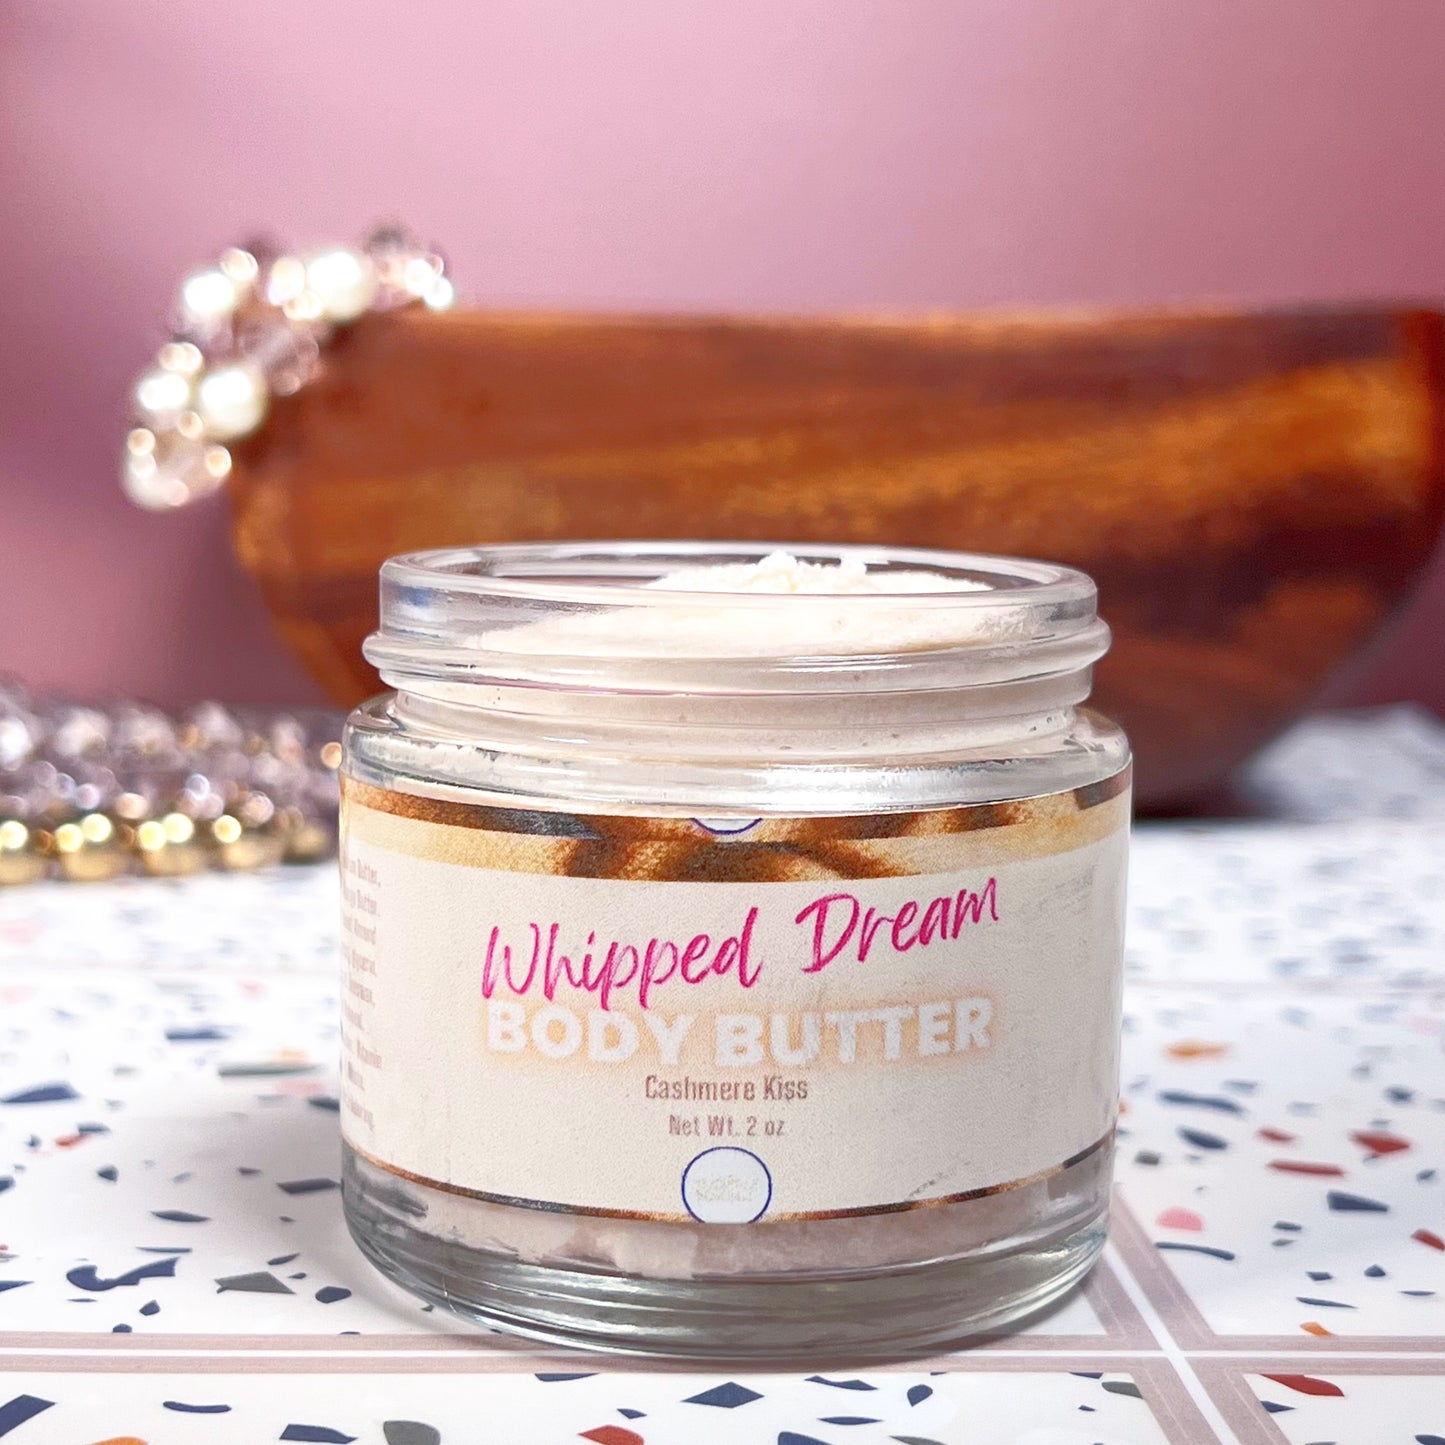 Whipped Dream Whipped Body Butter "Cashmere Kiss"